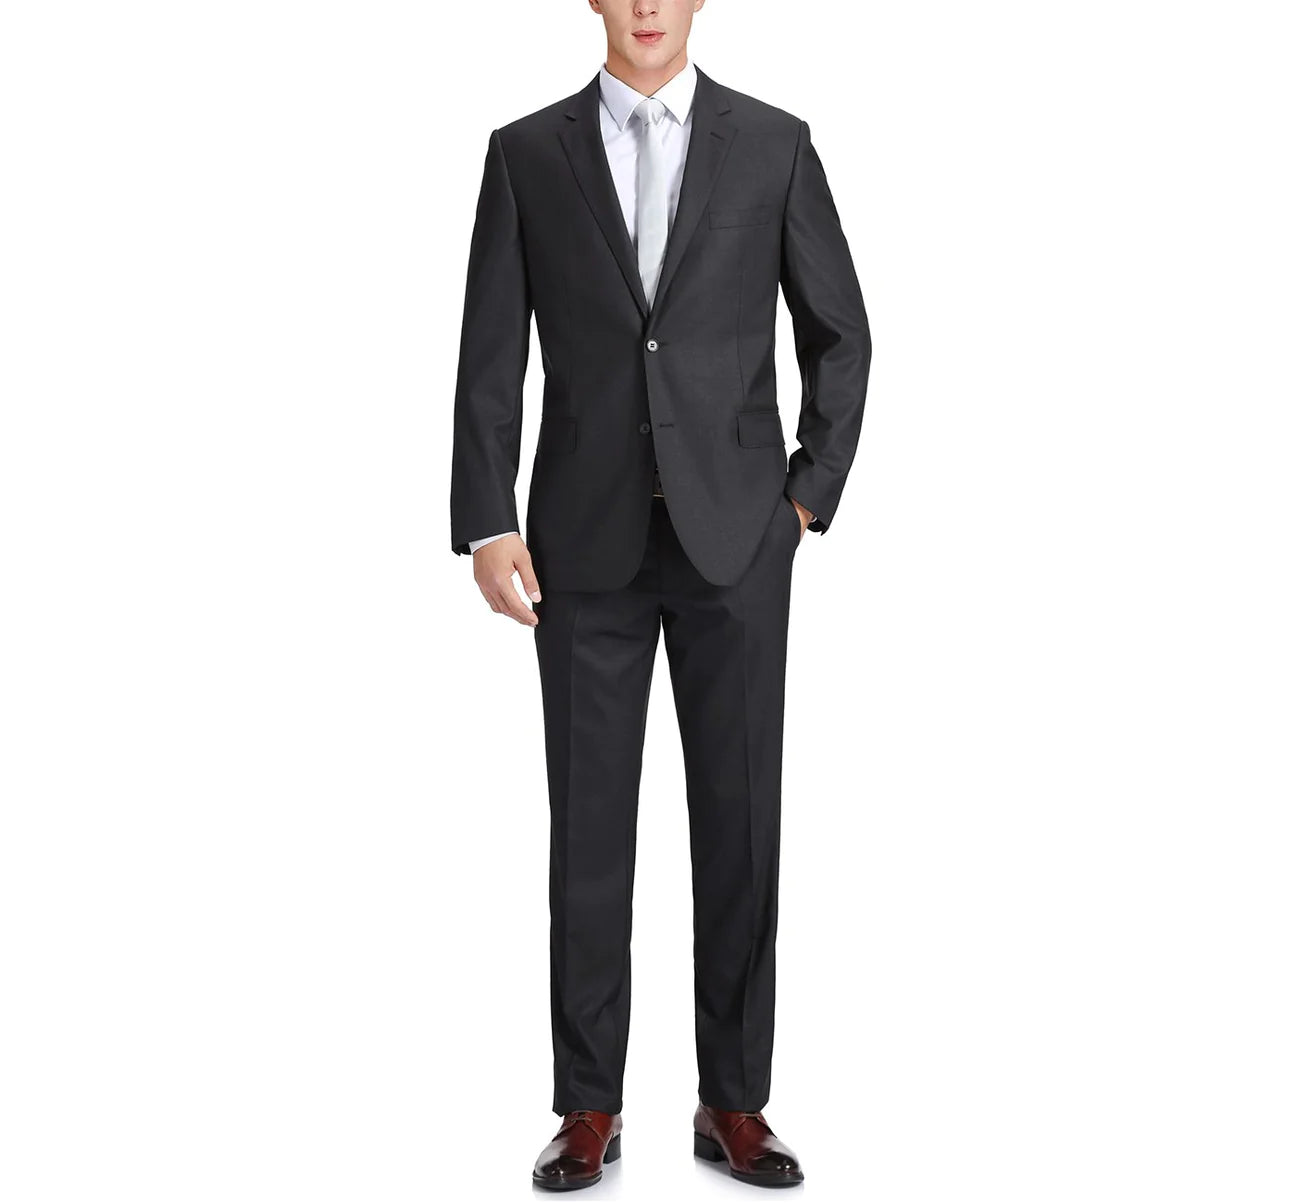 2BY2 100% WOOL (Two-Pant Suit) ***2 FOR $700.00